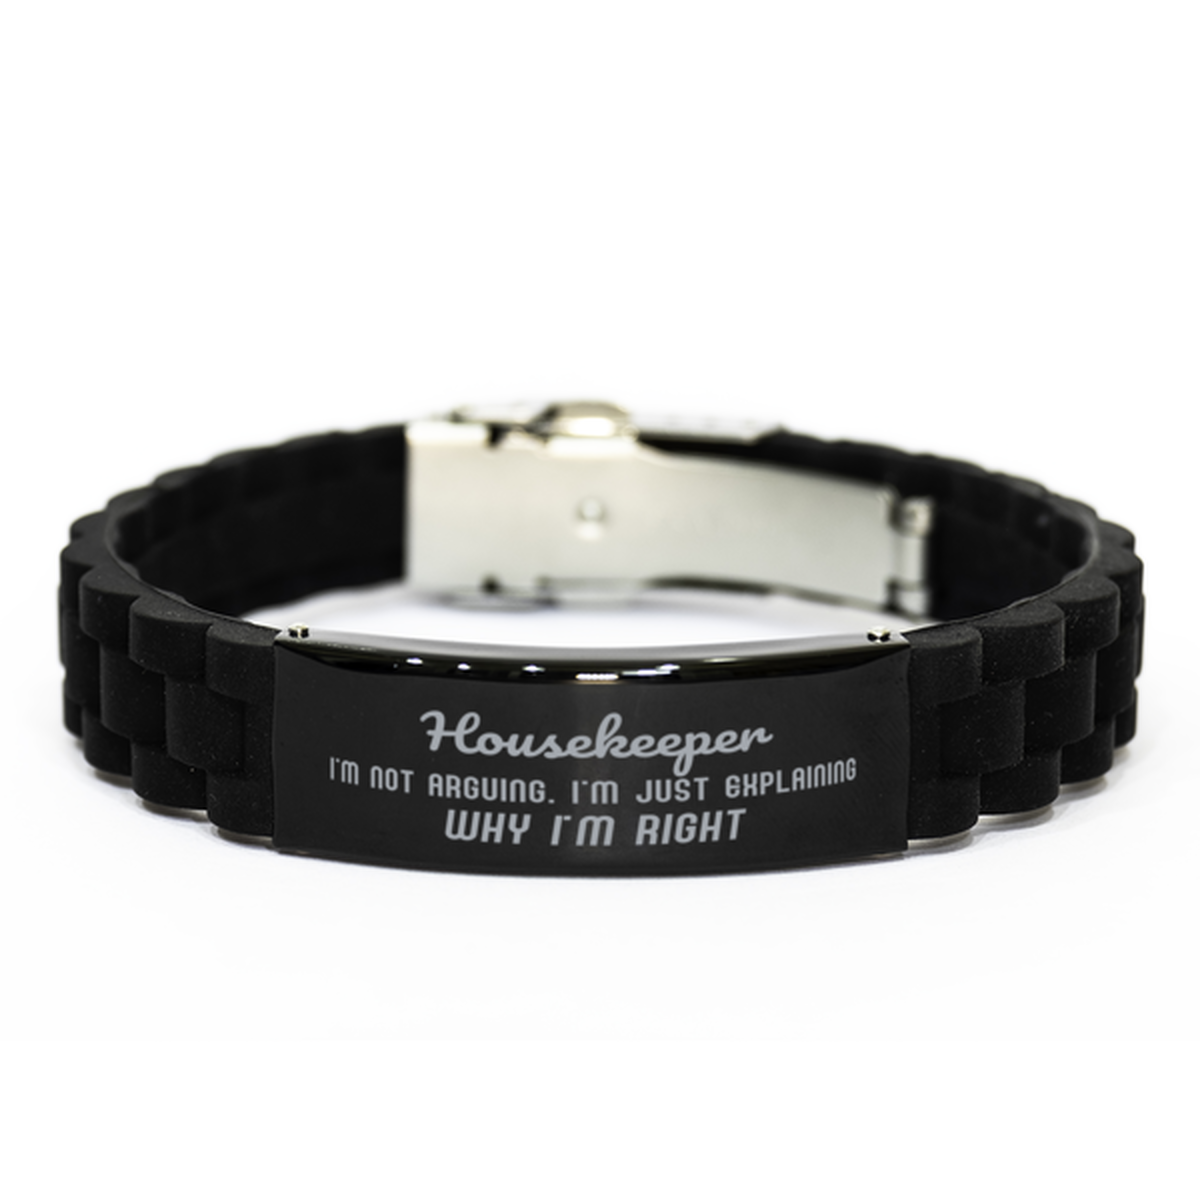 Housekeeper I'm not Arguing. I'm Just Explaining Why I'm RIGHT Black Glidelock Clasp Bracelet, Funny Saying Quote Housekeeper Gifts For Housekeeper Graduation Birthday Christmas Gifts for Men Women Coworker